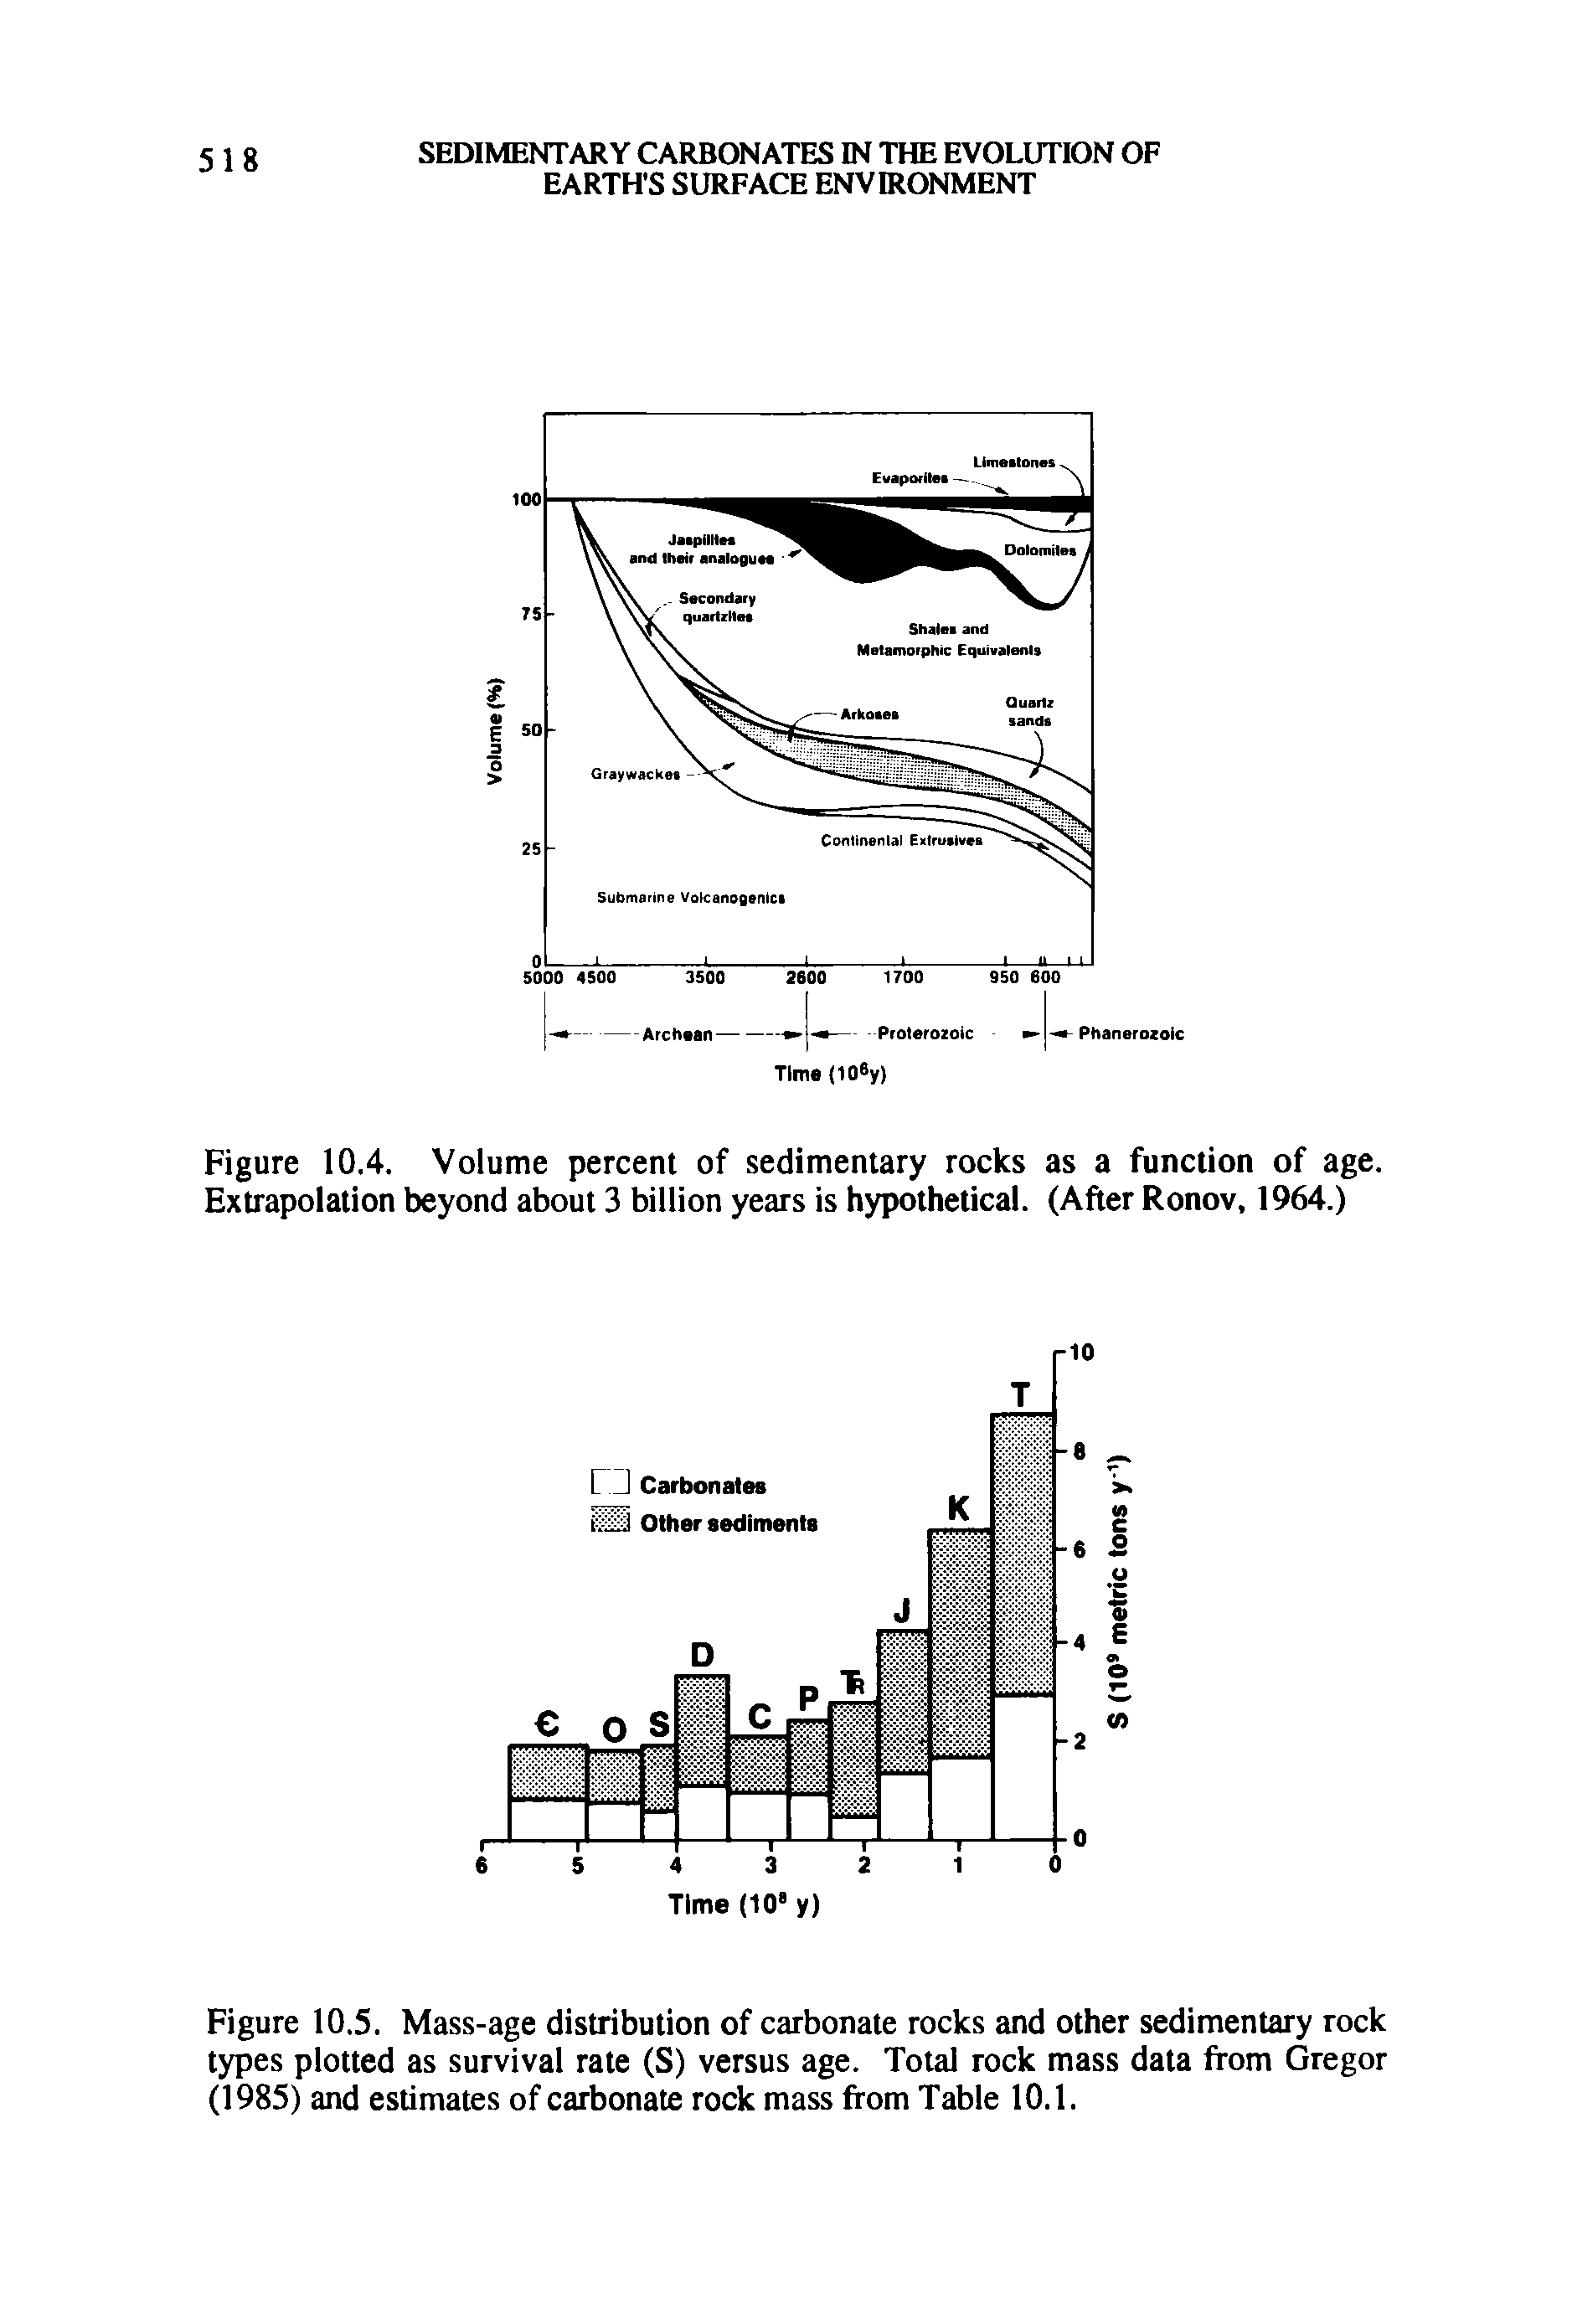 Figure 10.5. Mass-age distribution of carbonate rocks and other sedimentary rock types plotted as survival rate (S) versus age. Total rock mass data from Gregor (1985) and estimates of carbonate rock mass from Table 10.1.